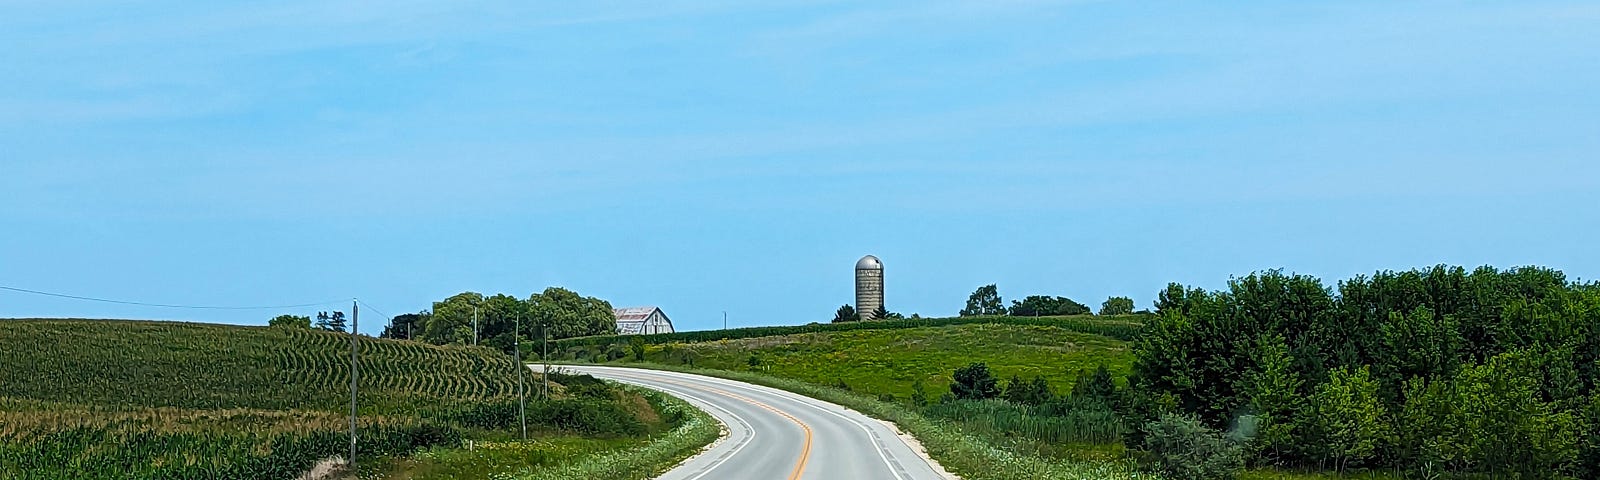 This shows a road with a curve with open fields on both sides.